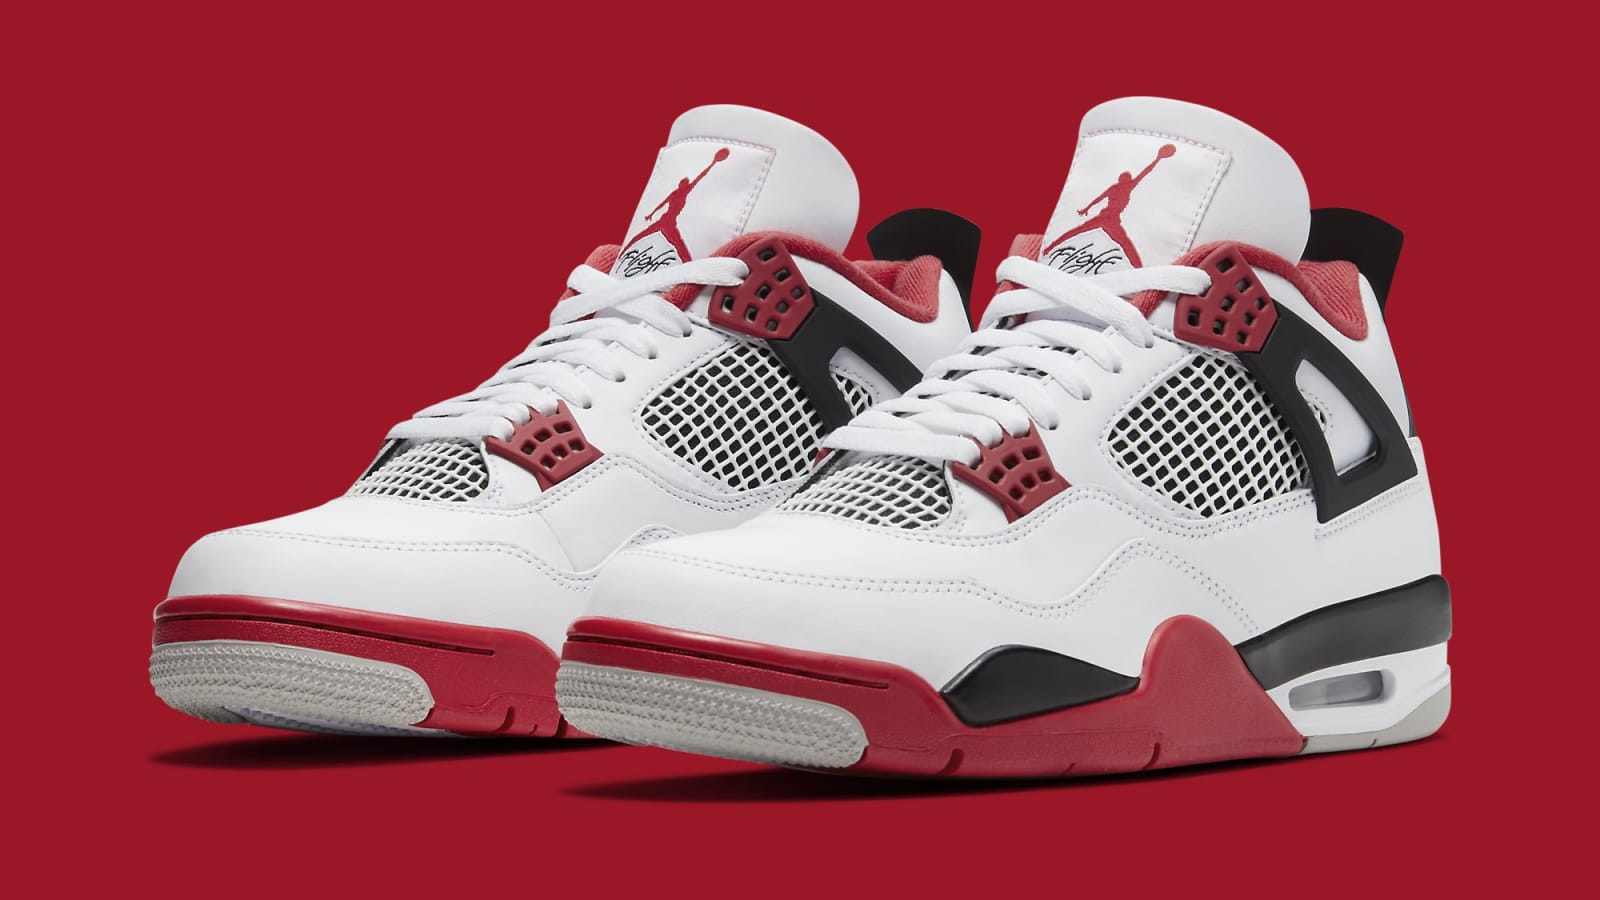 Air Jordan 4 "Fire Red" Officially Revealed: Detailed Photos